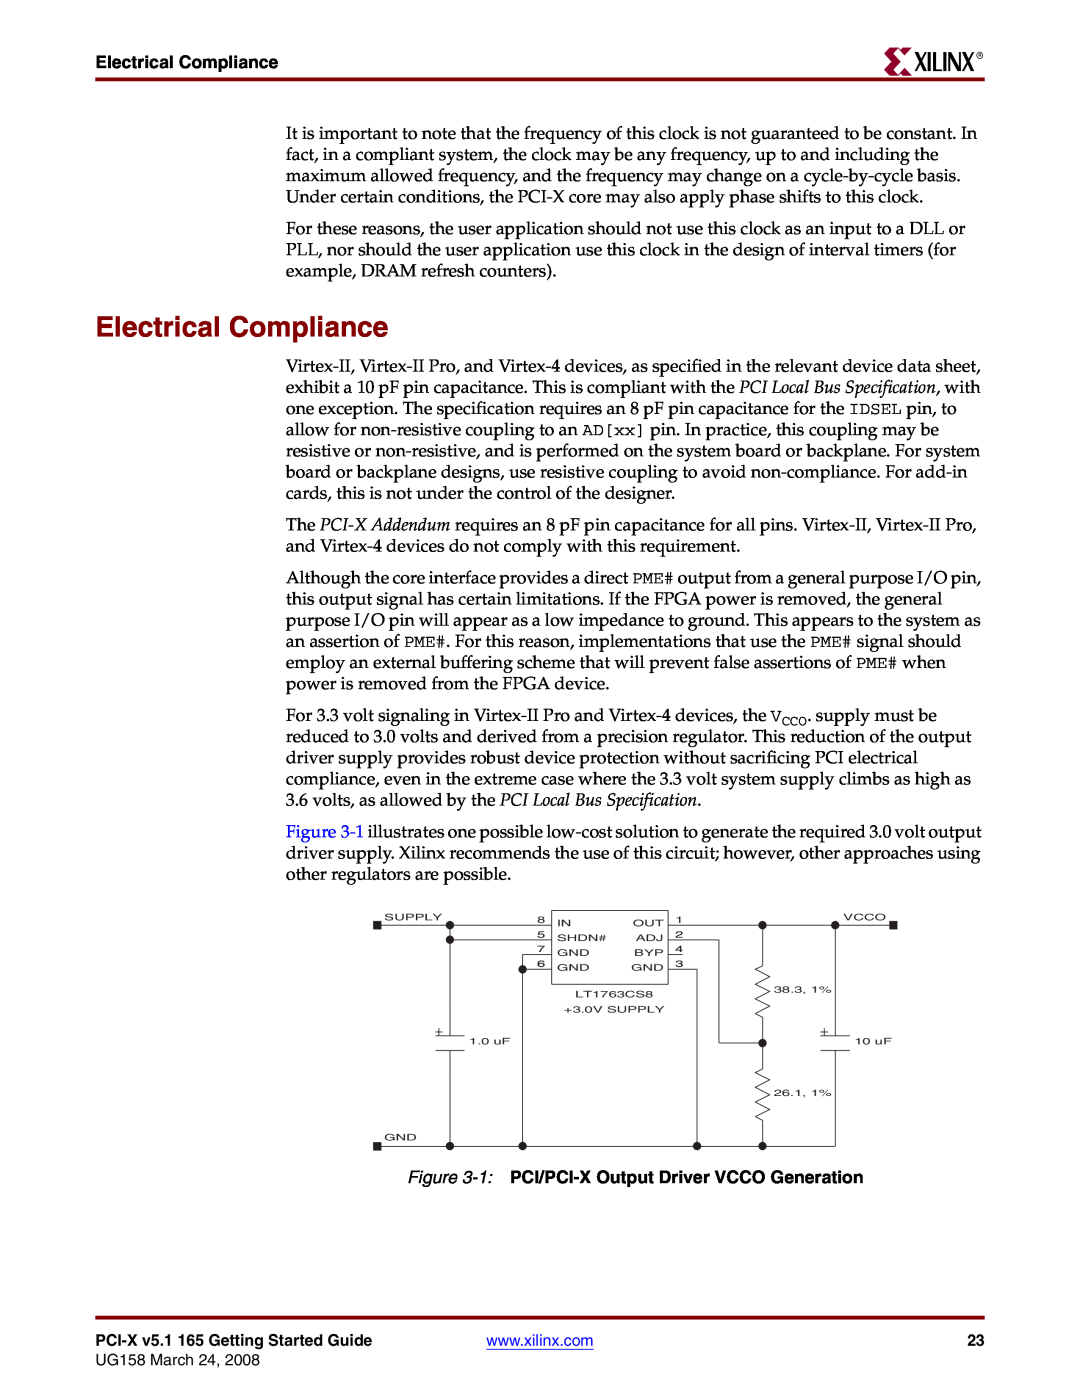 Xilinx PCI-X v5.1 manual Electrical Compliance, volts, as allowed by the PCI Local Bus Specification 